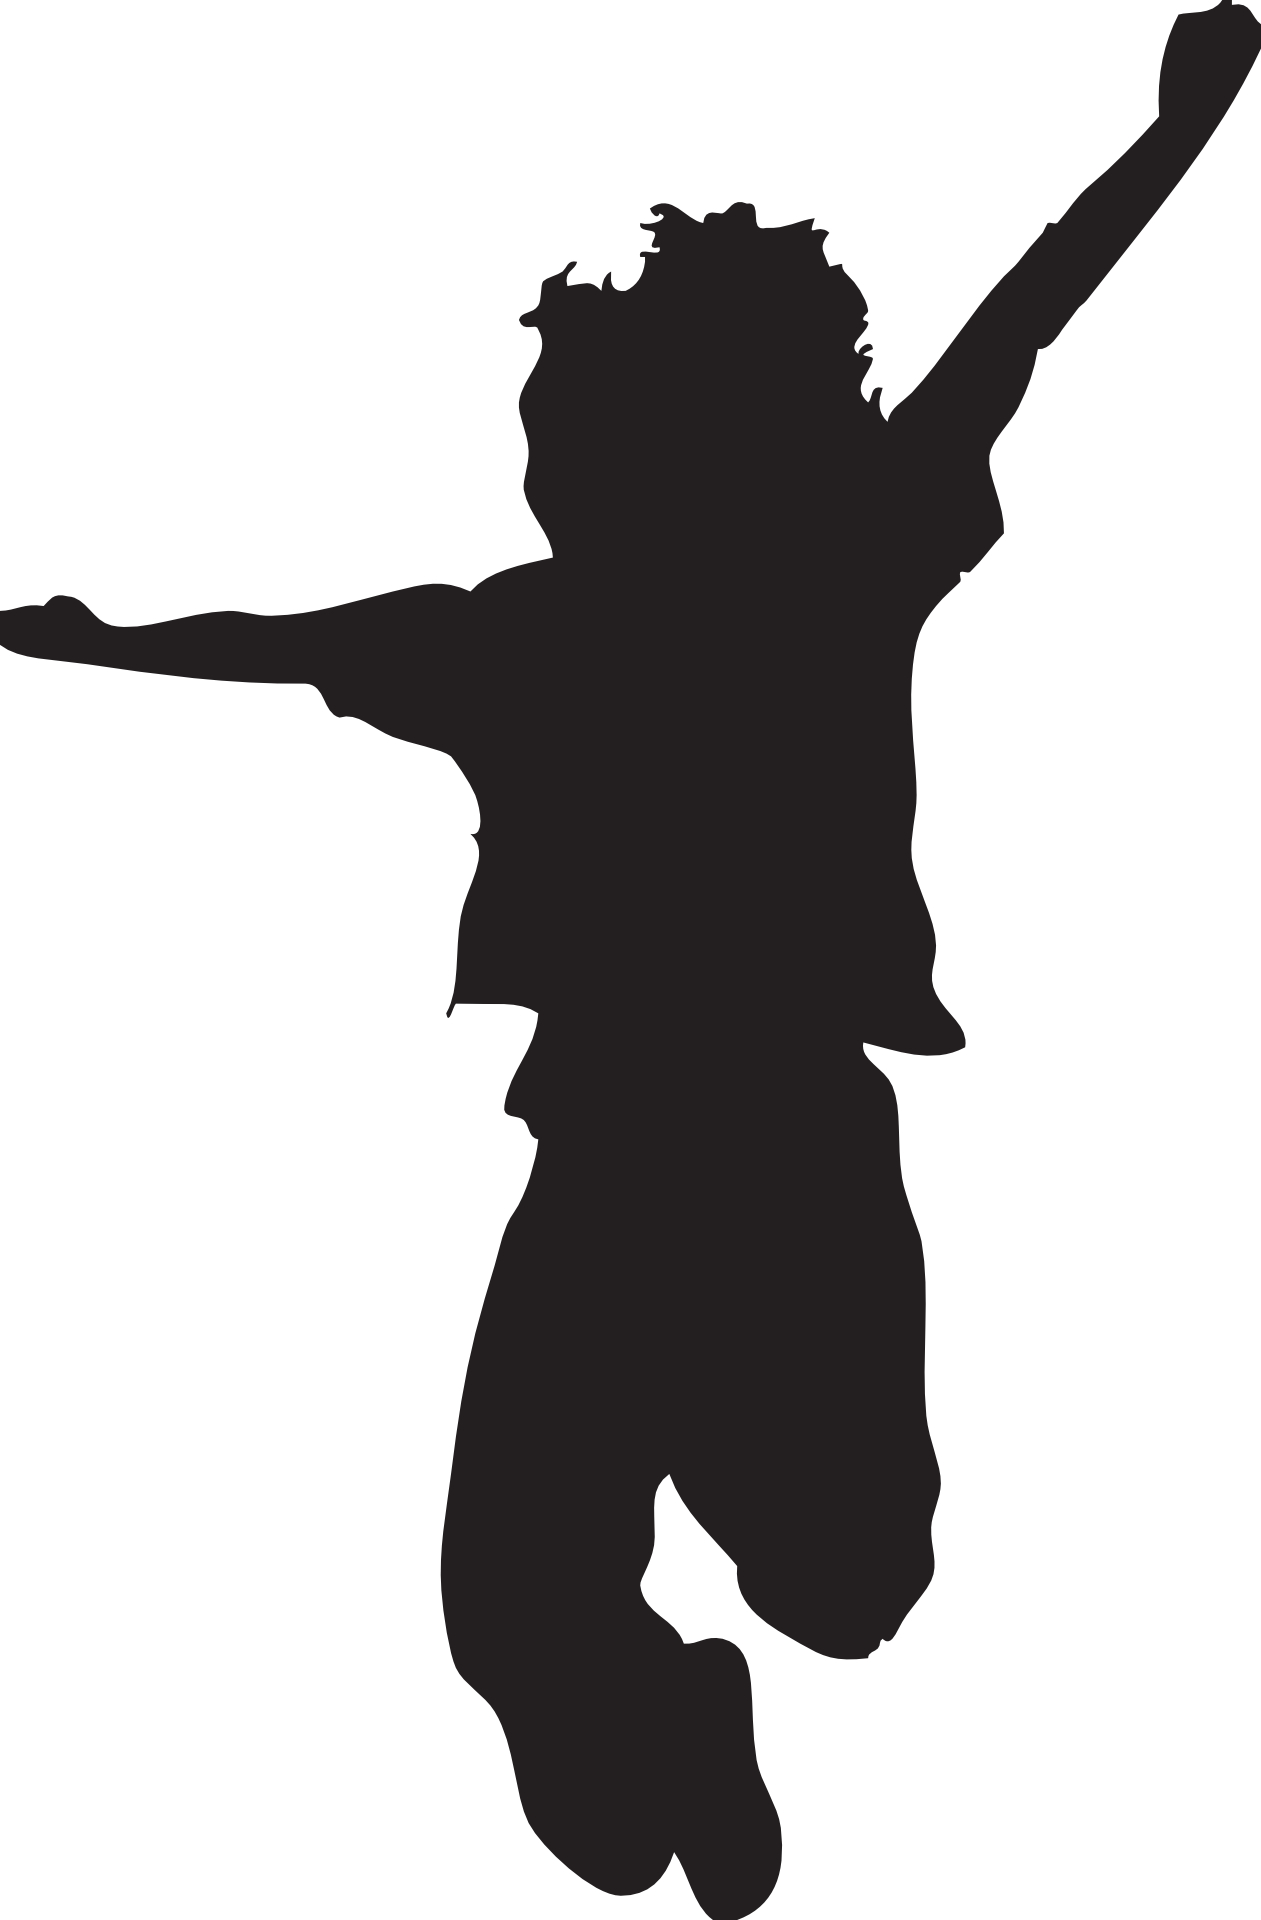 Jumping kid silhouette-boy outline vector